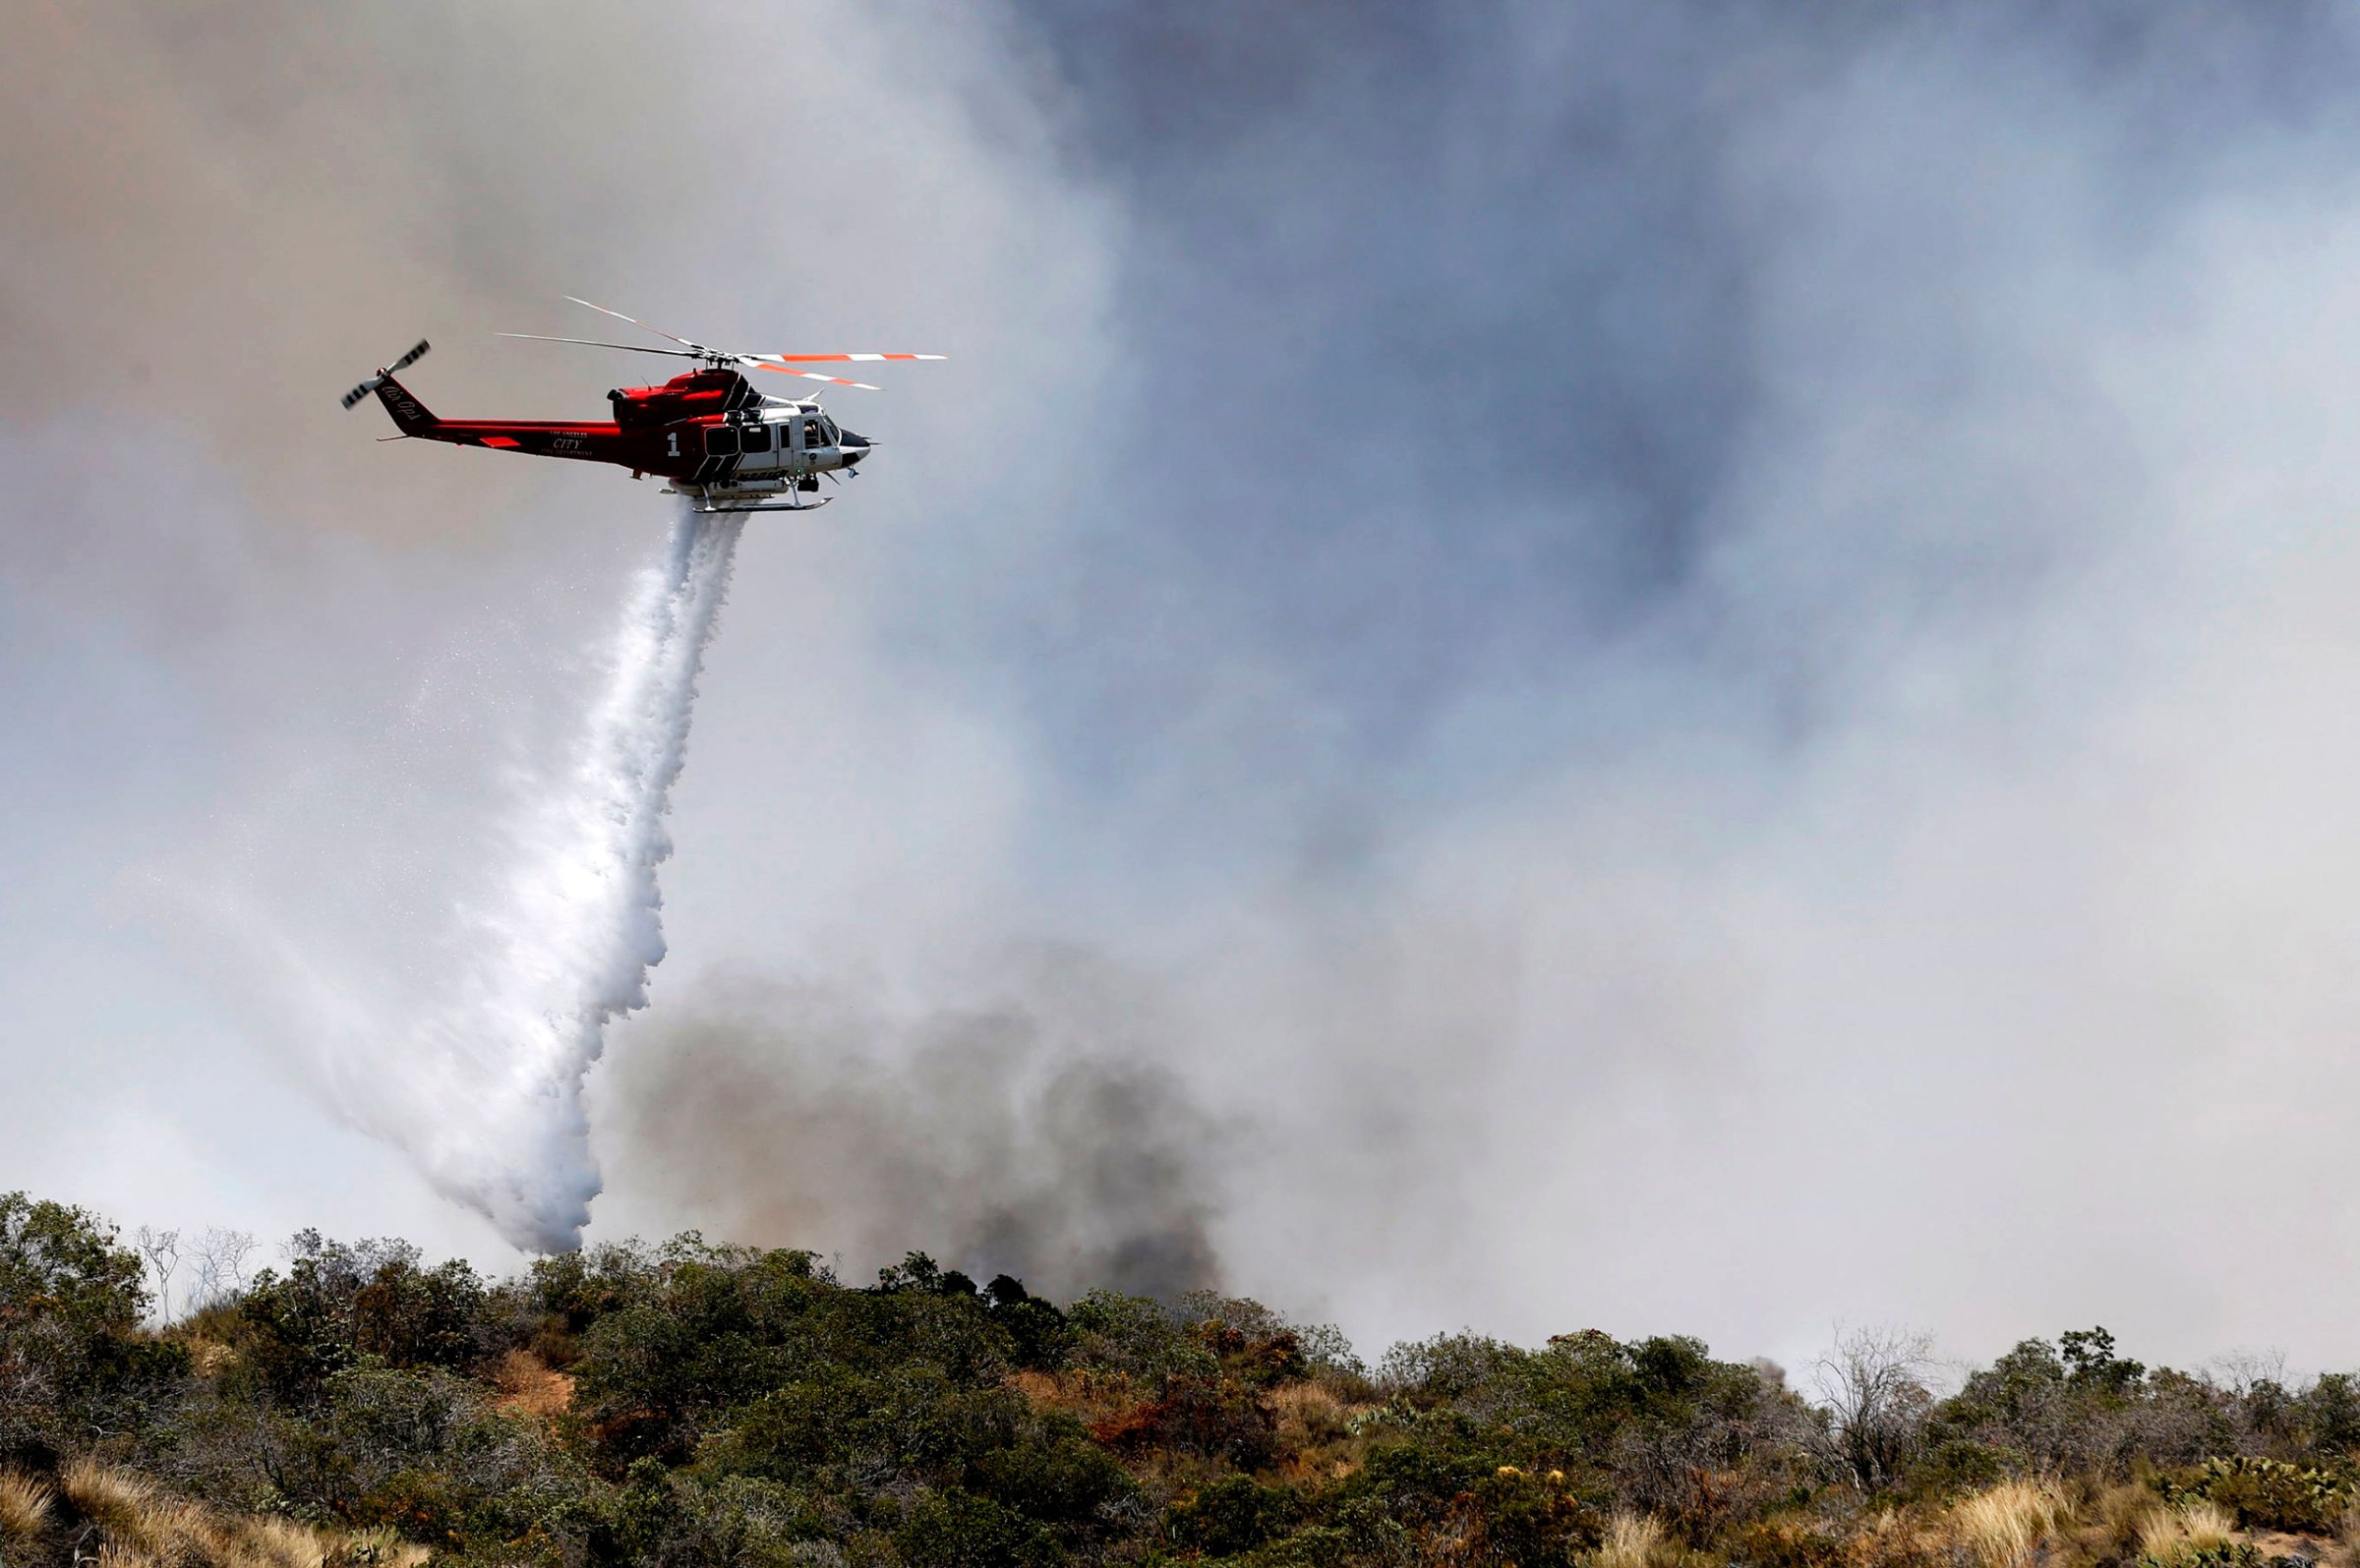 A firefighting helicopter makes a water drop over a wildfire just north of Azusa, Calif., Monday, June 20, 2016. Two fires have erupted in the San Gabriel Mountains northeast of Los Angeles amid withering heat. The first fire reported Monday was near Morris Reservoir north of suburban Azusa. AP Photo/Nick Ut)